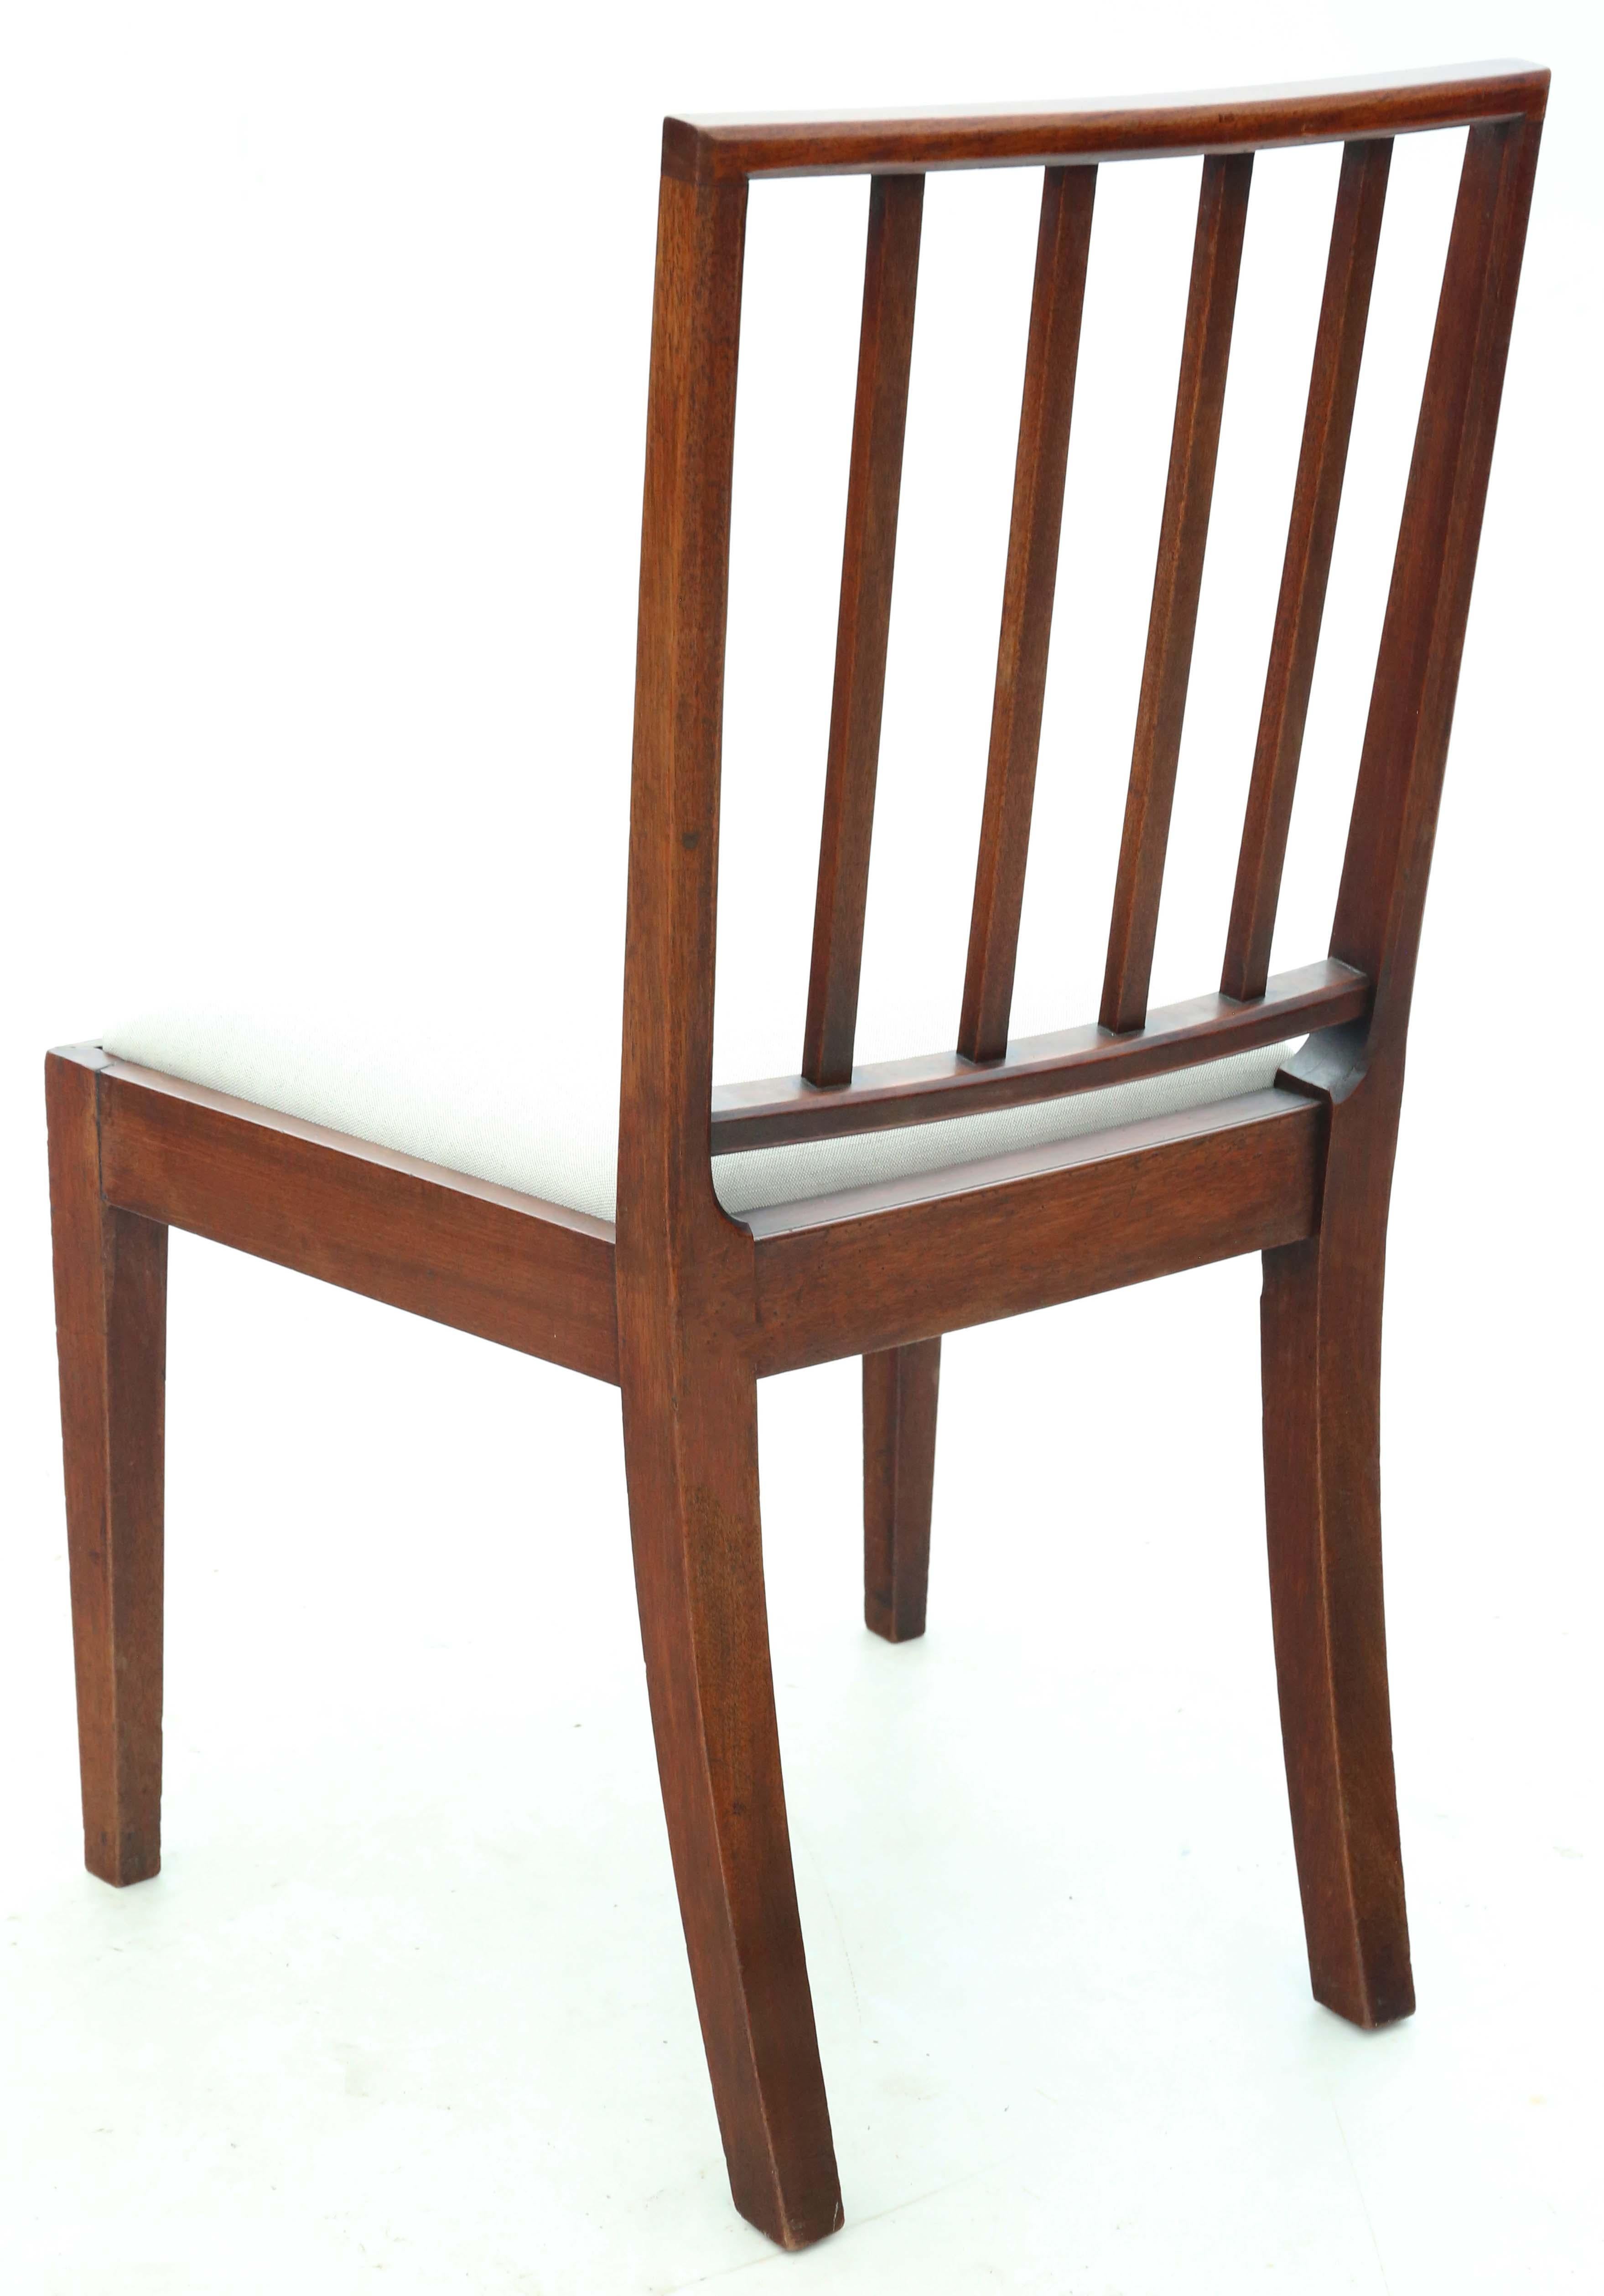 Mahogany Dining Chairs: Set of 8 (6+2), Antique Quality, C1820 For Sale 2